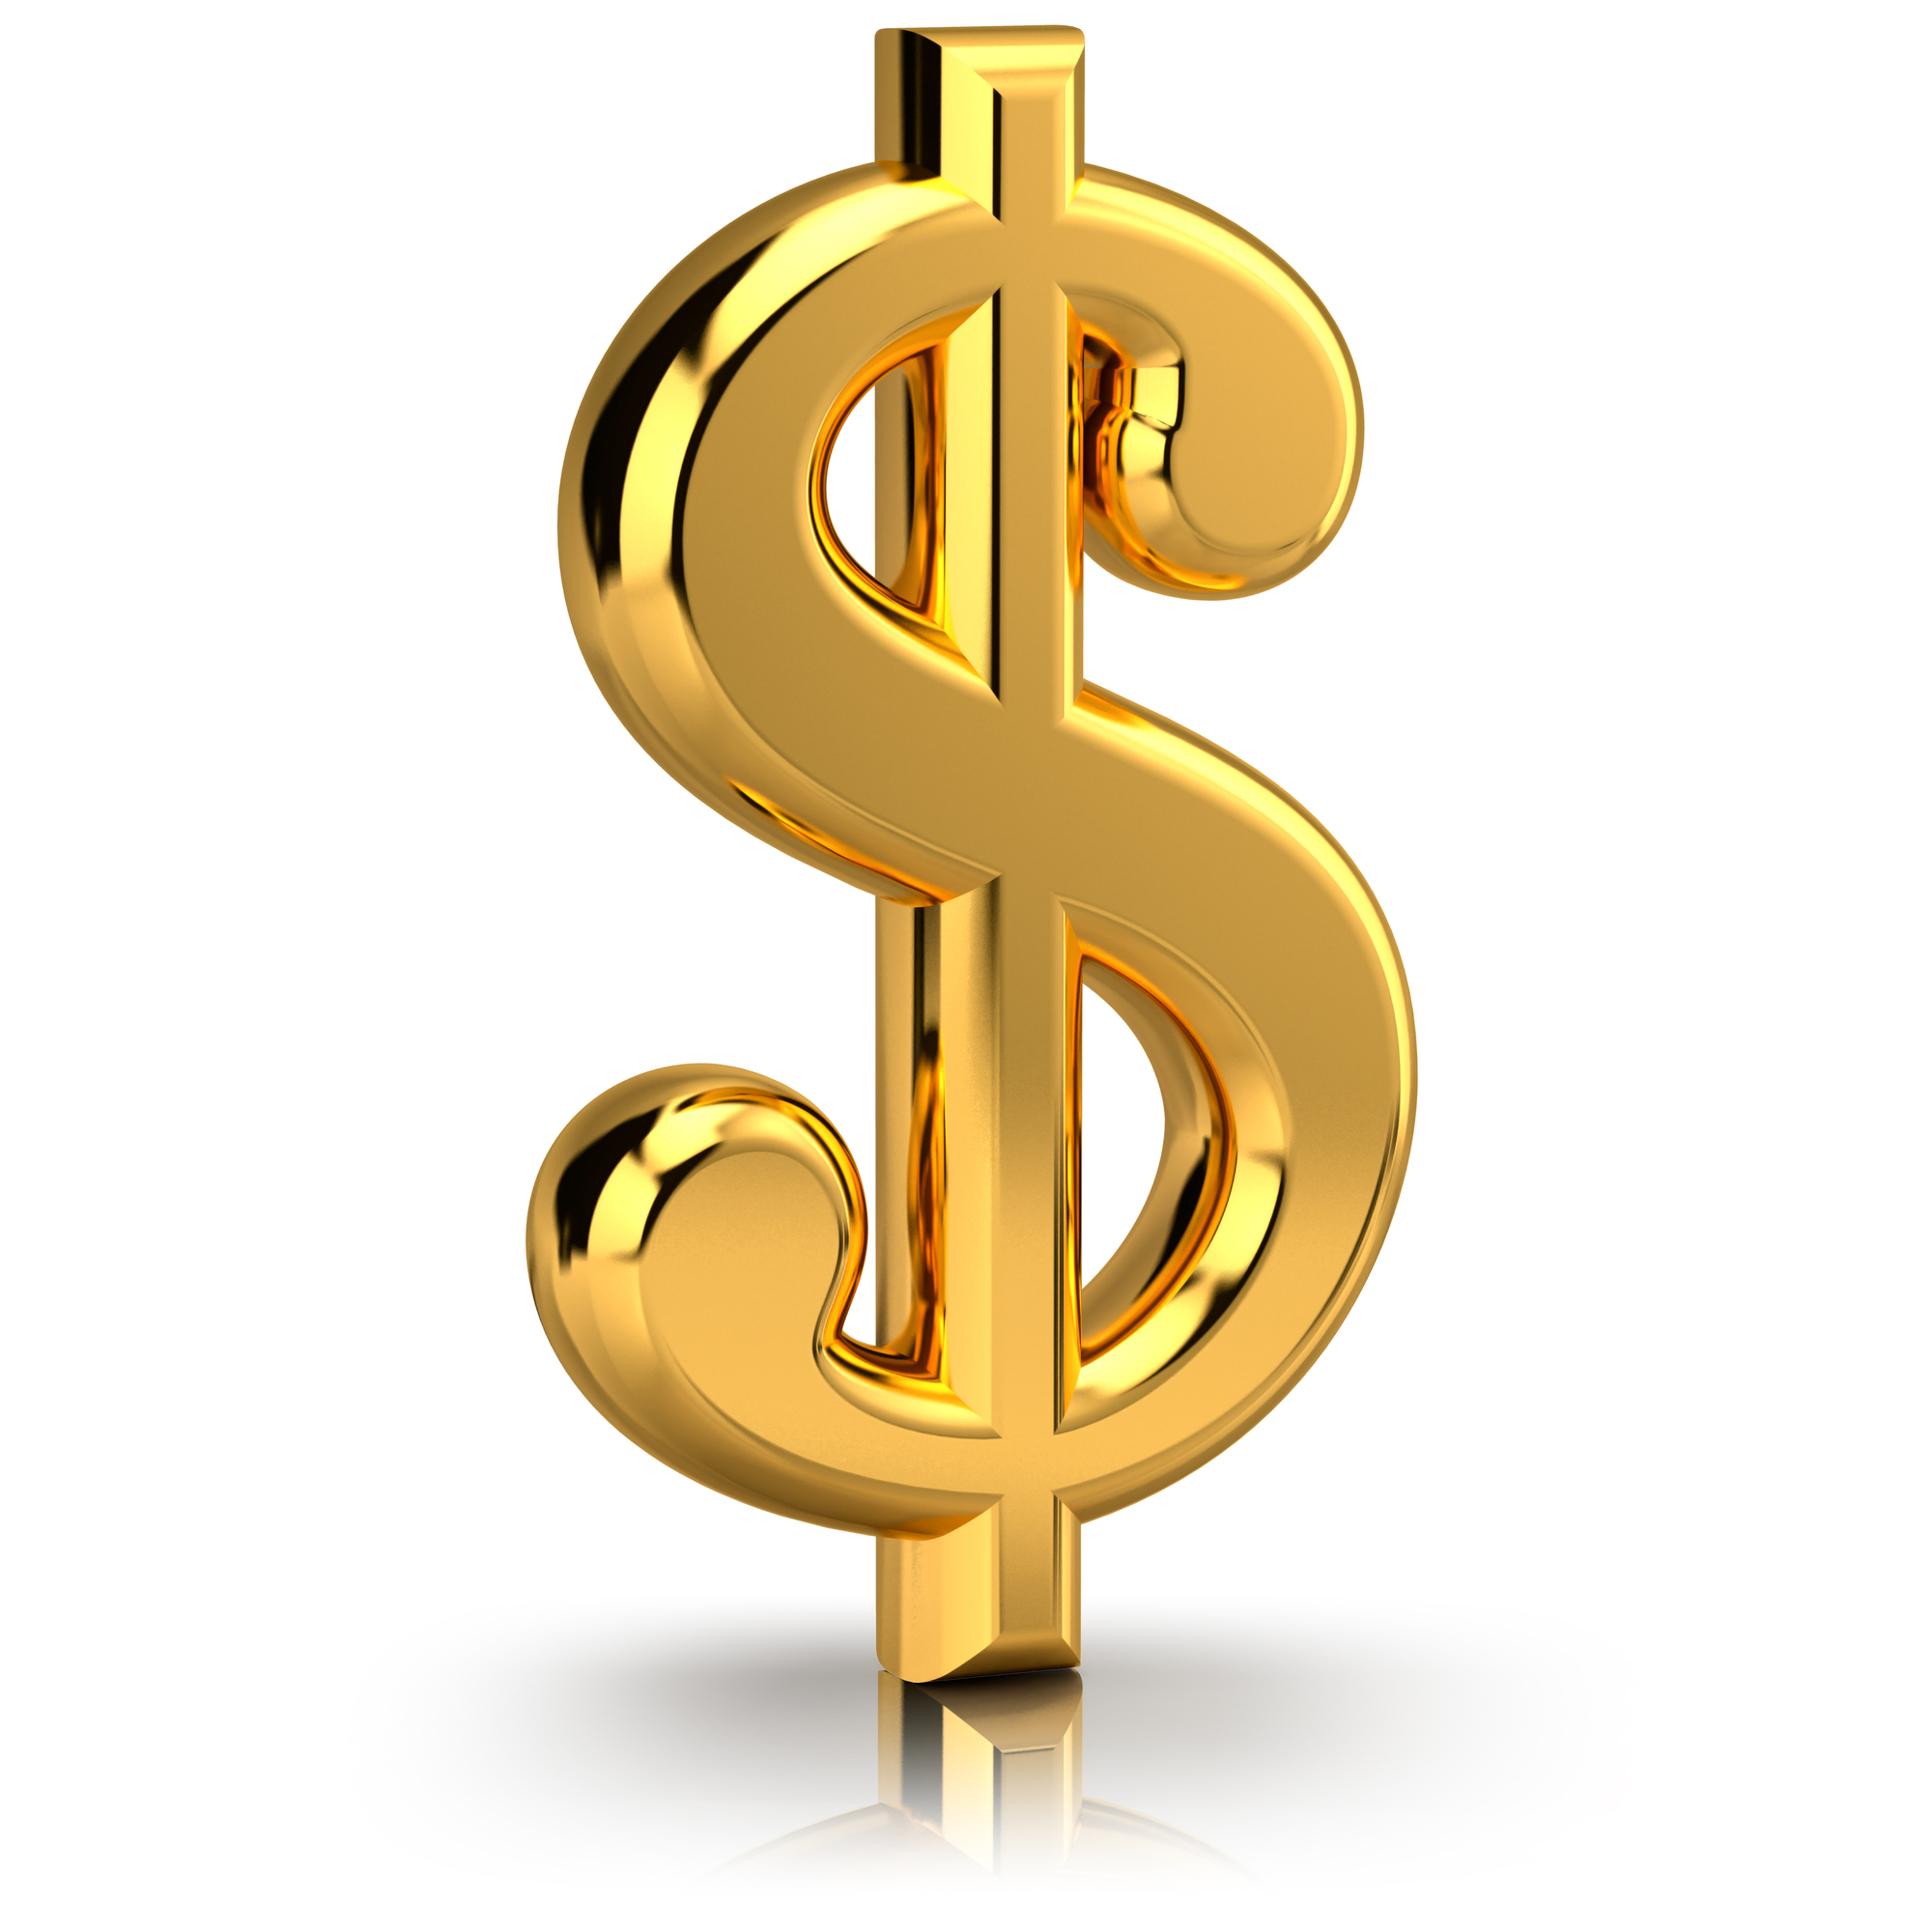 The dollar sign, symbolizing the financial activities, isolated on a white background